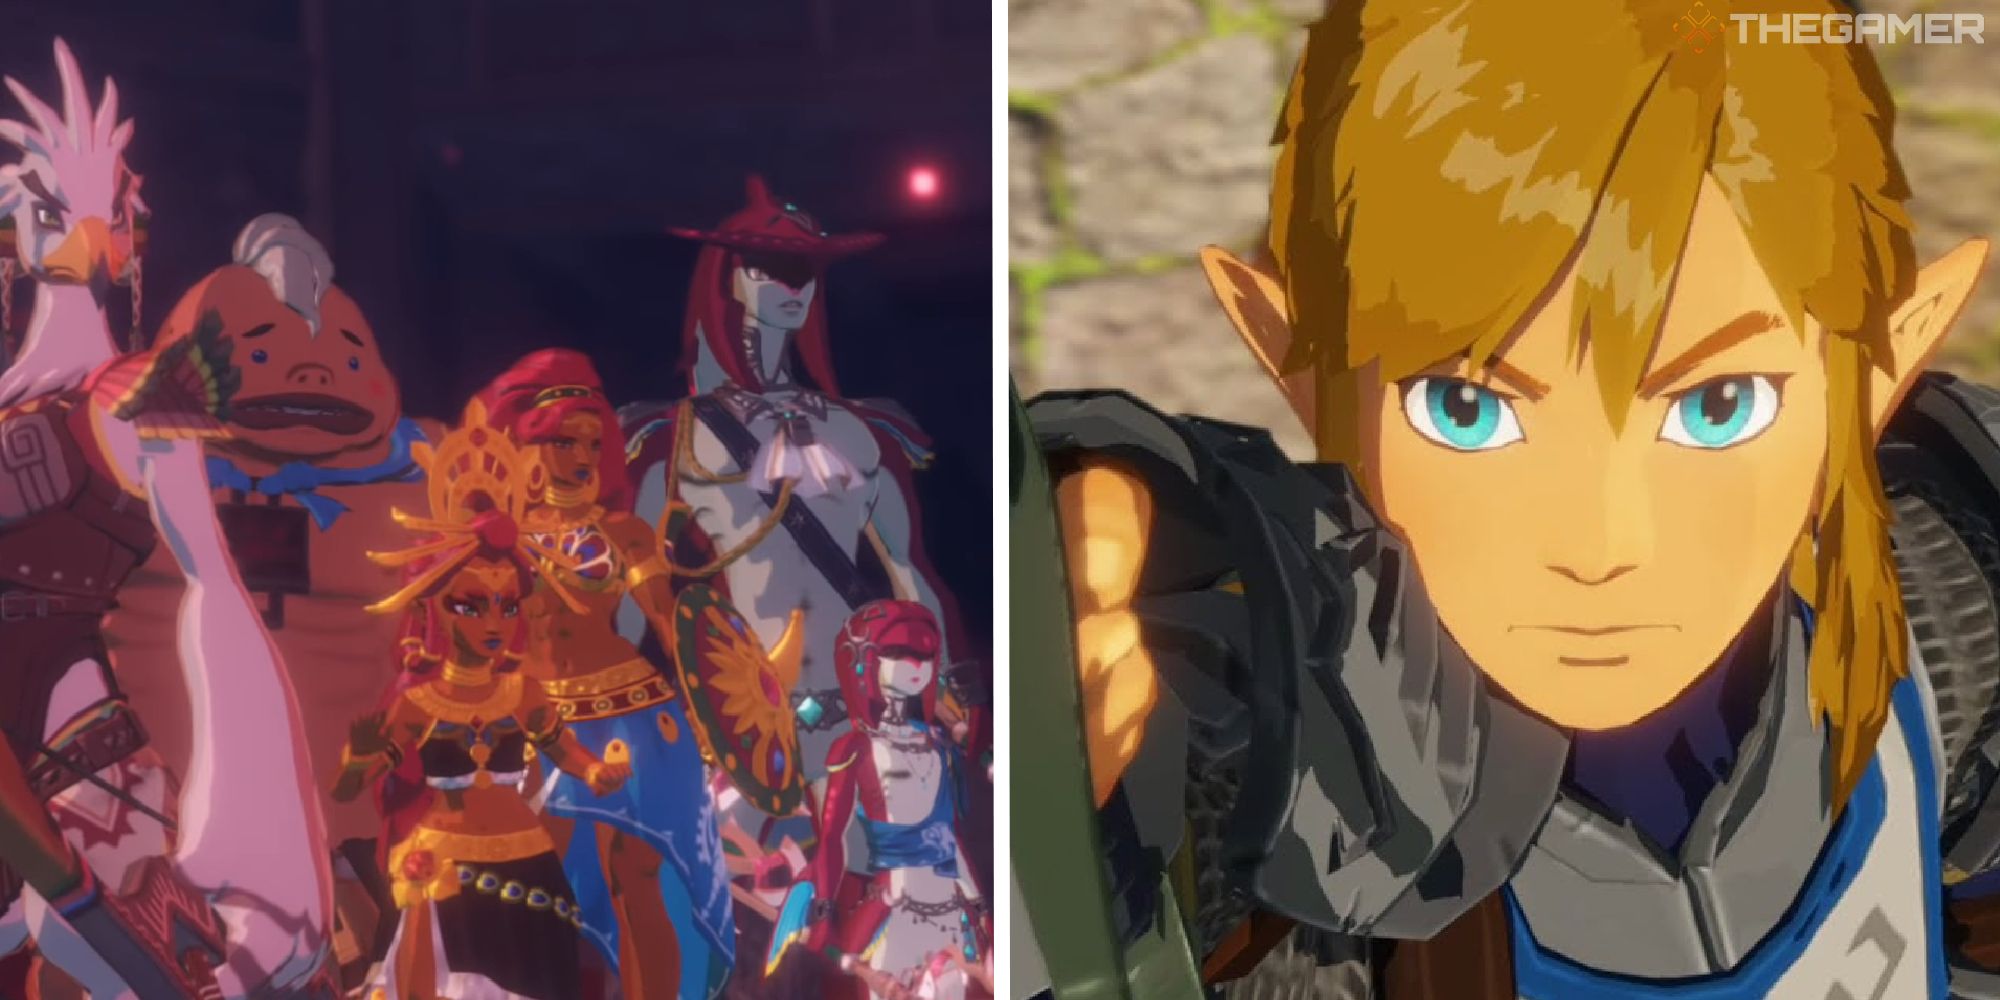 split image showing champions, next to image of link looking up